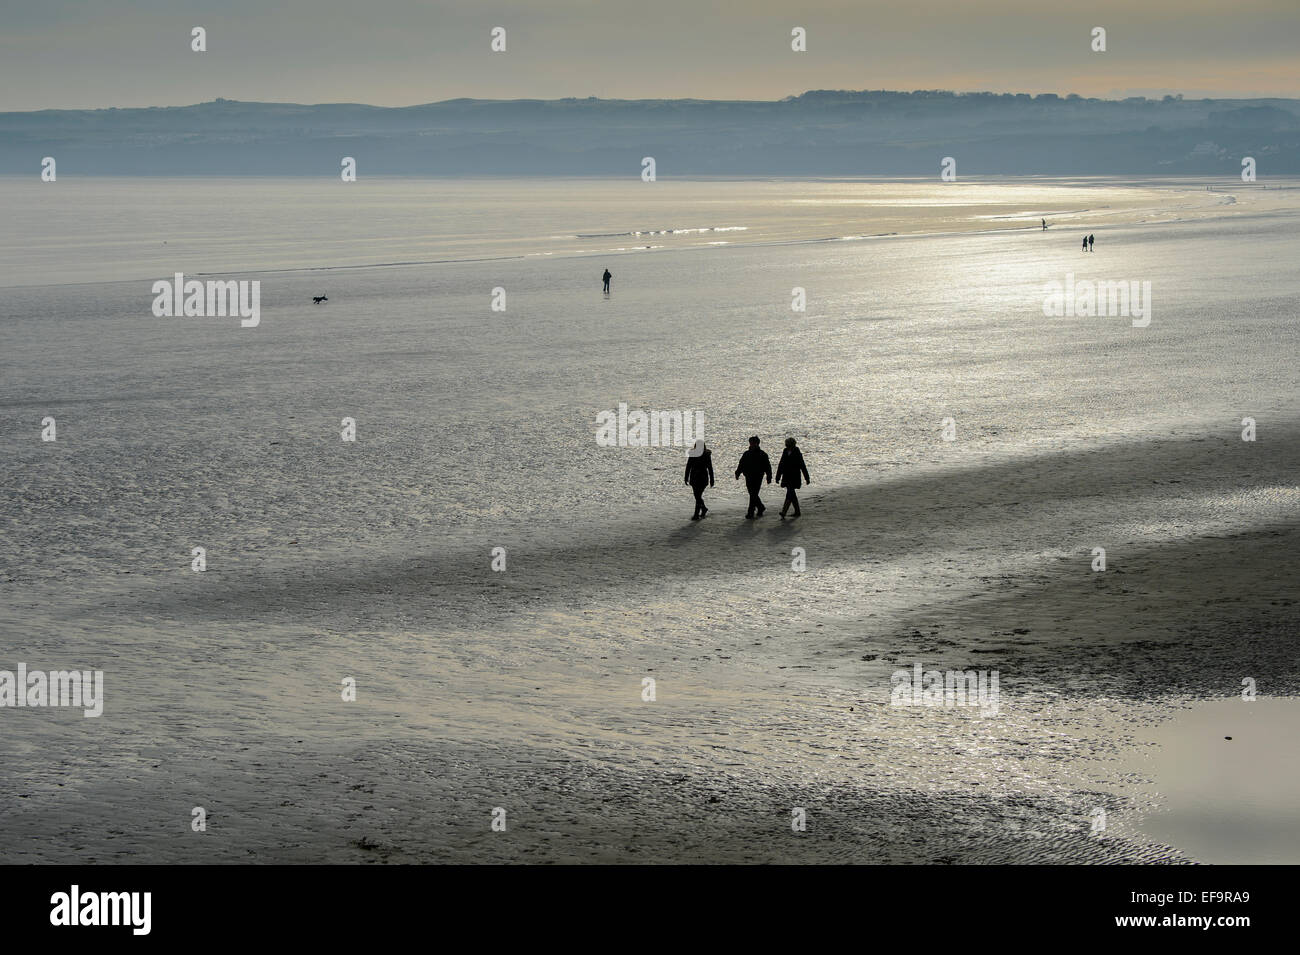 A group of three 3 walkers silhouetted on Filey Beach. The tide is out. Low tide. Stock Photo